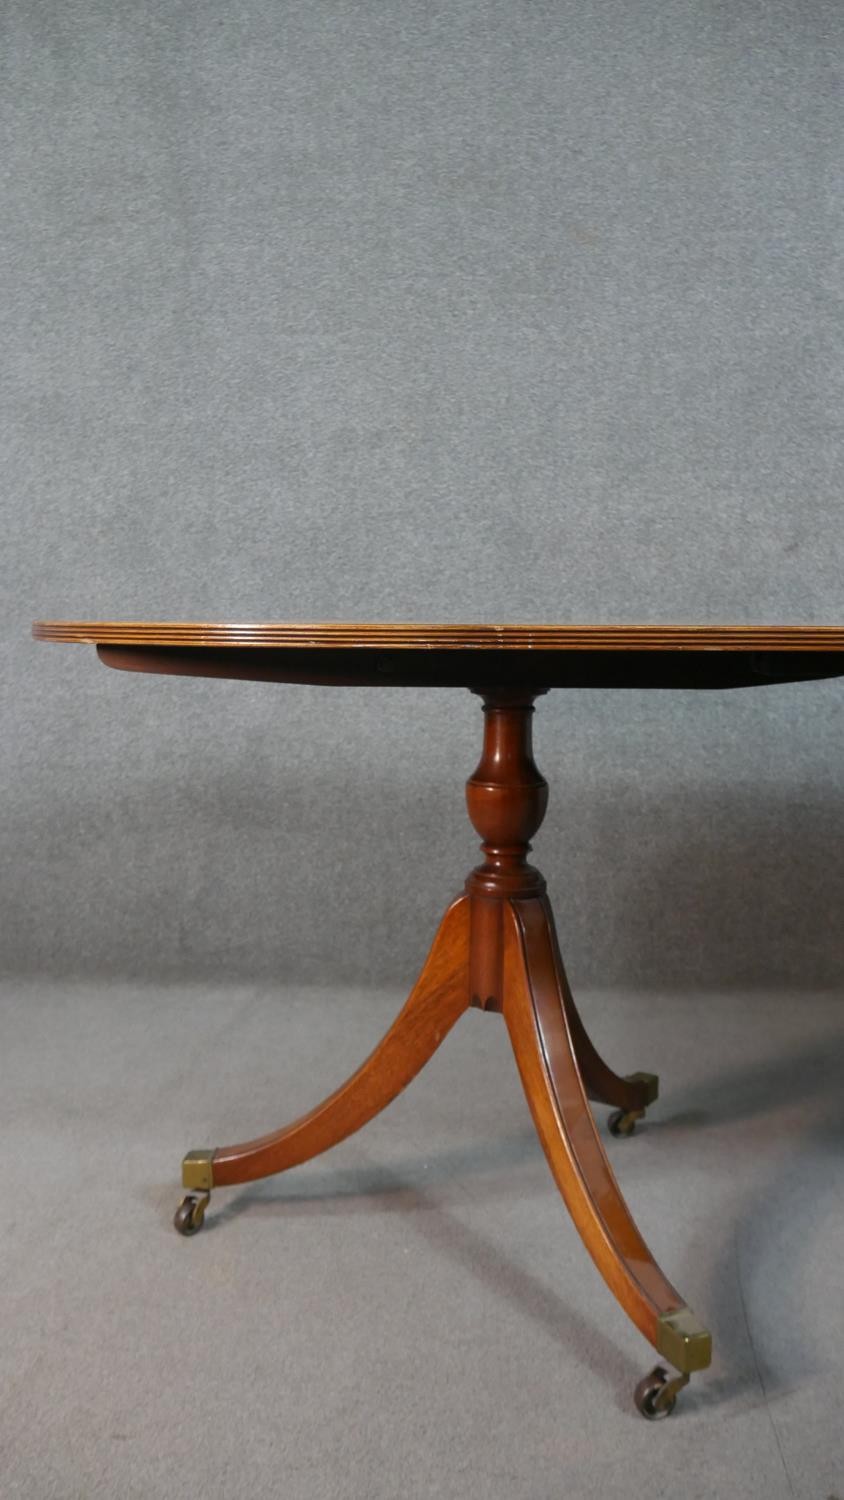 A George III style yew wood D-end dining table, with a cross banded top and additional leaf, on - Image 5 of 9